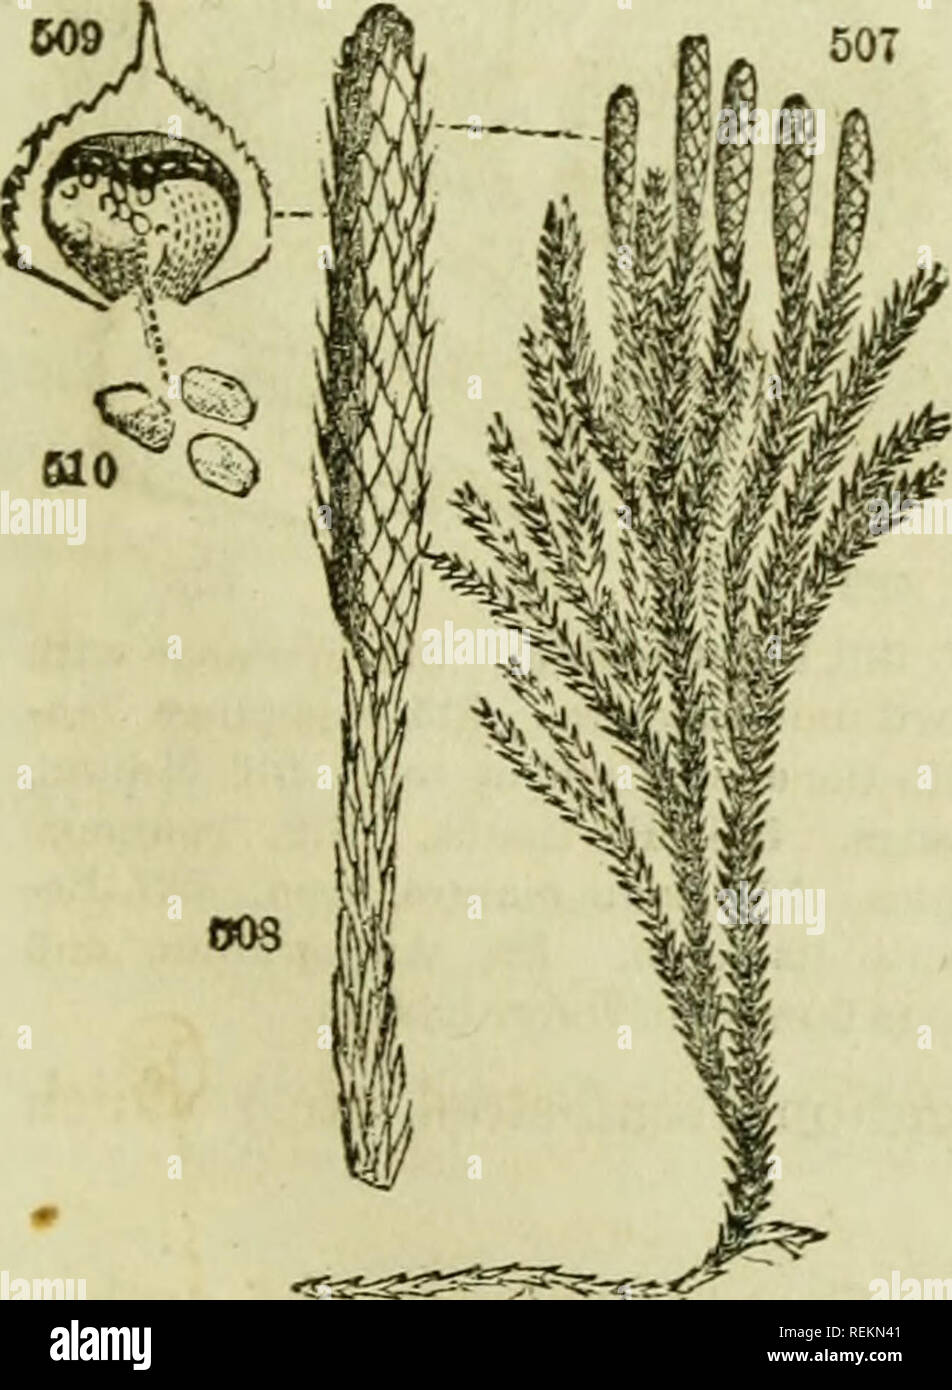 . Class-book of botany: being outlines of the structure, physiology and classification of plants; with a flora of the United States and Canada. Botany; Plants; Plants. 504 506 502 503 502, Equisetum arvense. 503, E. sylvaticum. 504. Section of the spike. 505, A sporange. 506, A sporo with its elators coiled.. 807, Lycopodium dendroideum. 50S, A single spike. 509, a. scale with its sporange bursting. 510, Spores. 624. Classes. The tribe last mentioned are embraced in the class Acrogens, so named by Lindley from their manner of growth (dtcpov, point or summit), lengthening into an axis. The rema Stock Photo